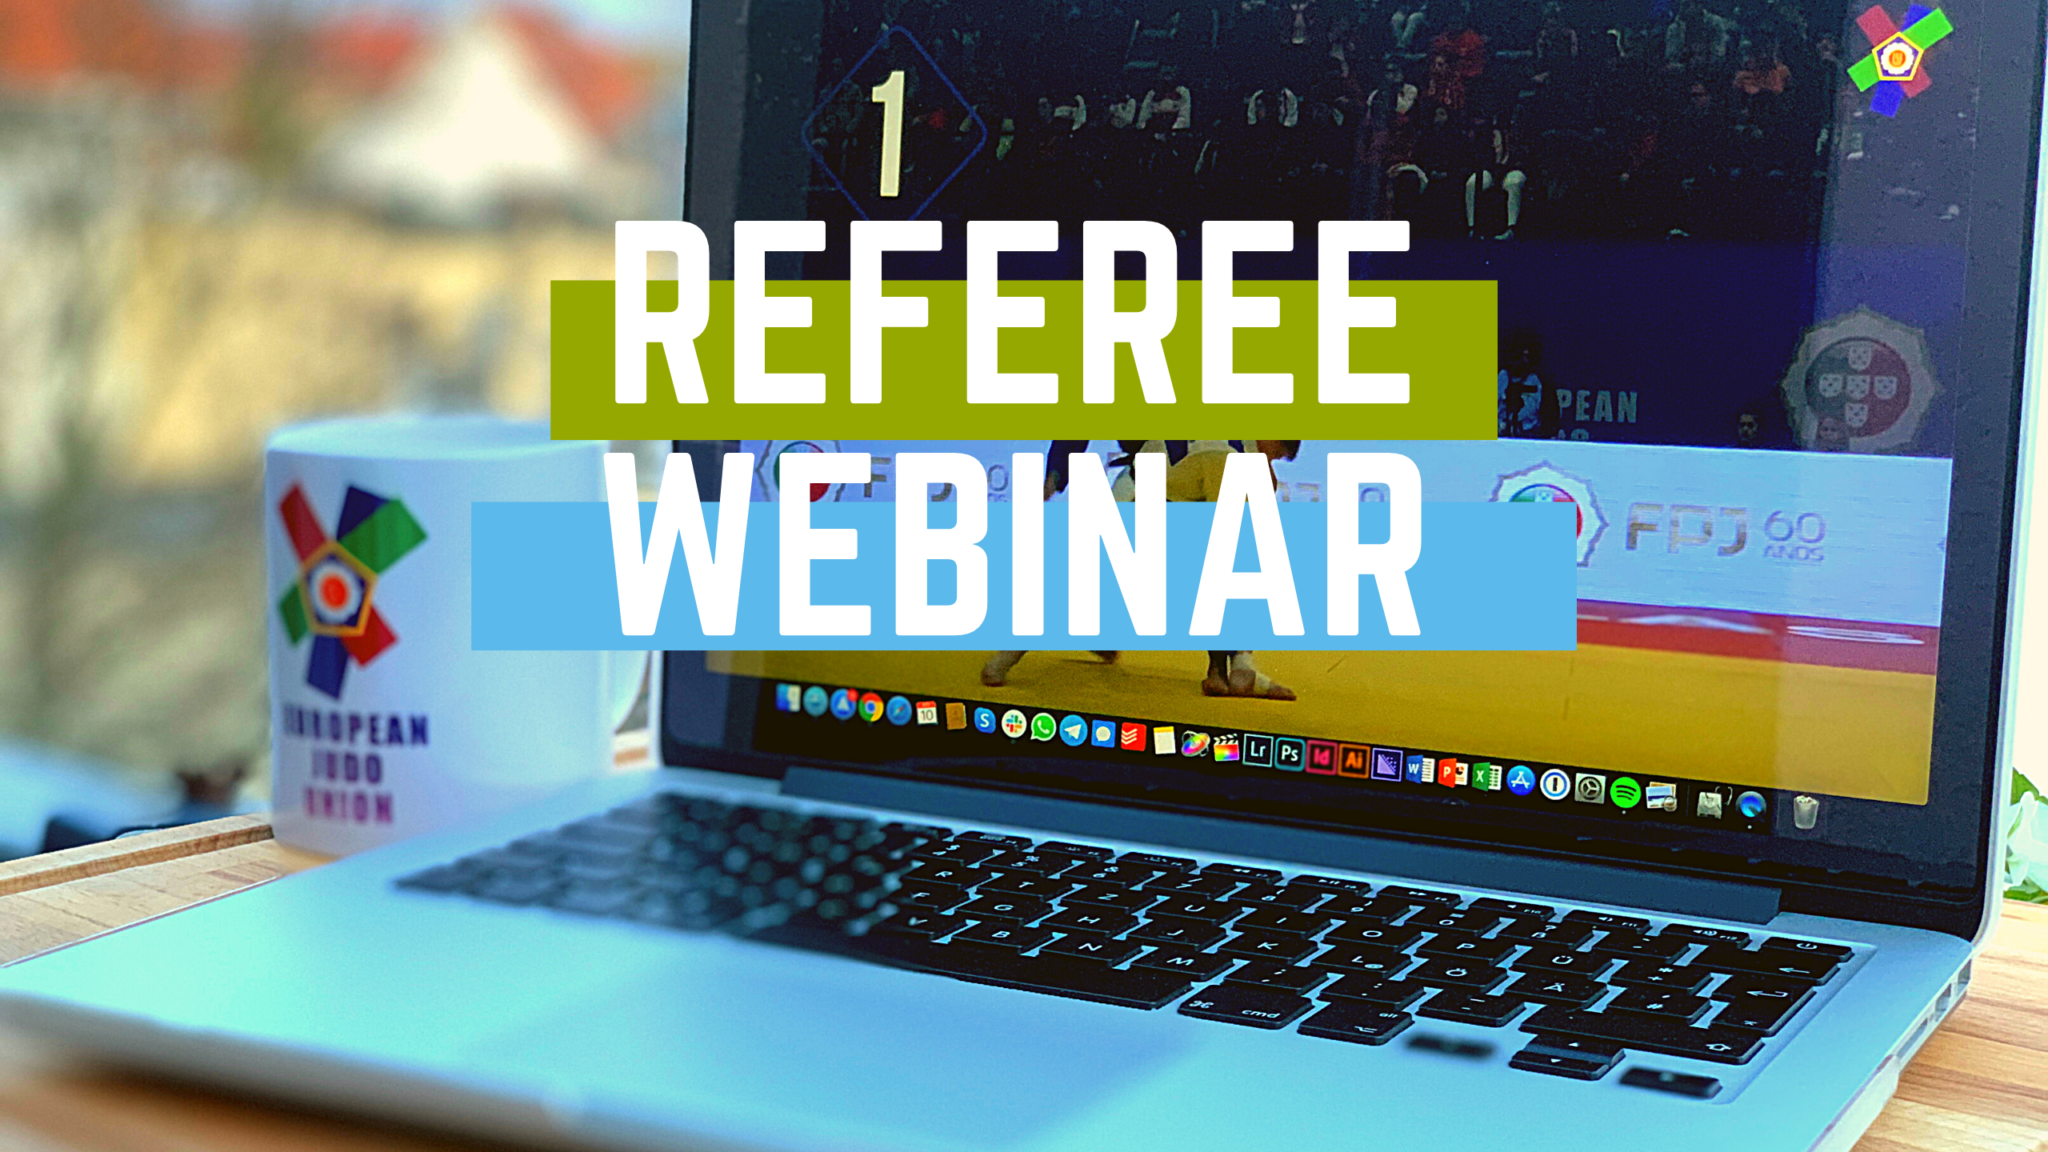 REFEREEING WEBINAR CONTINUES